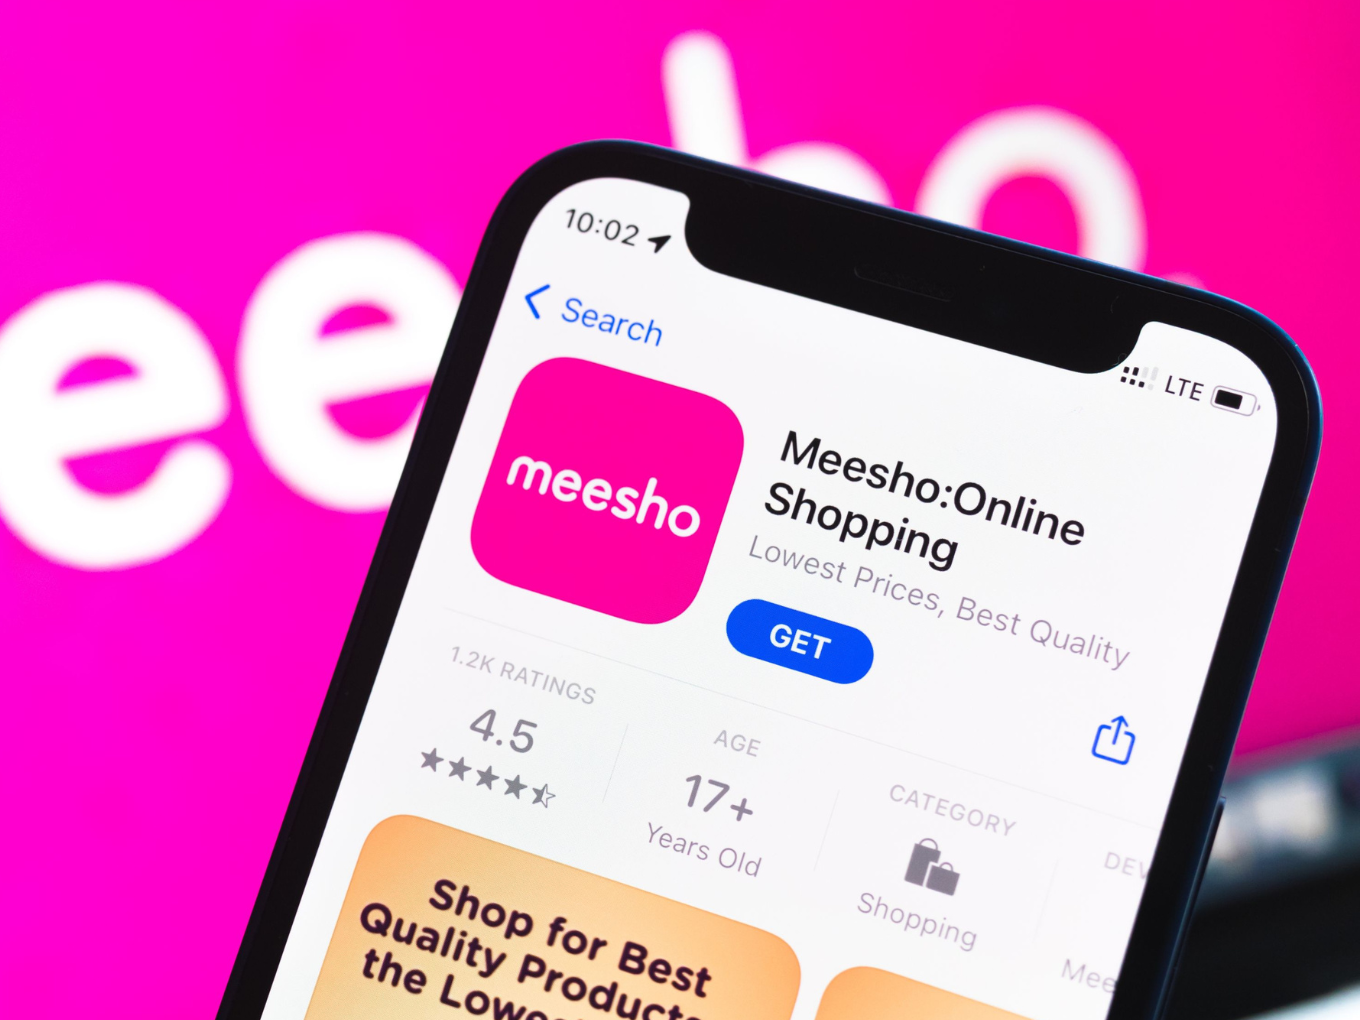 meesho online shopping offers today